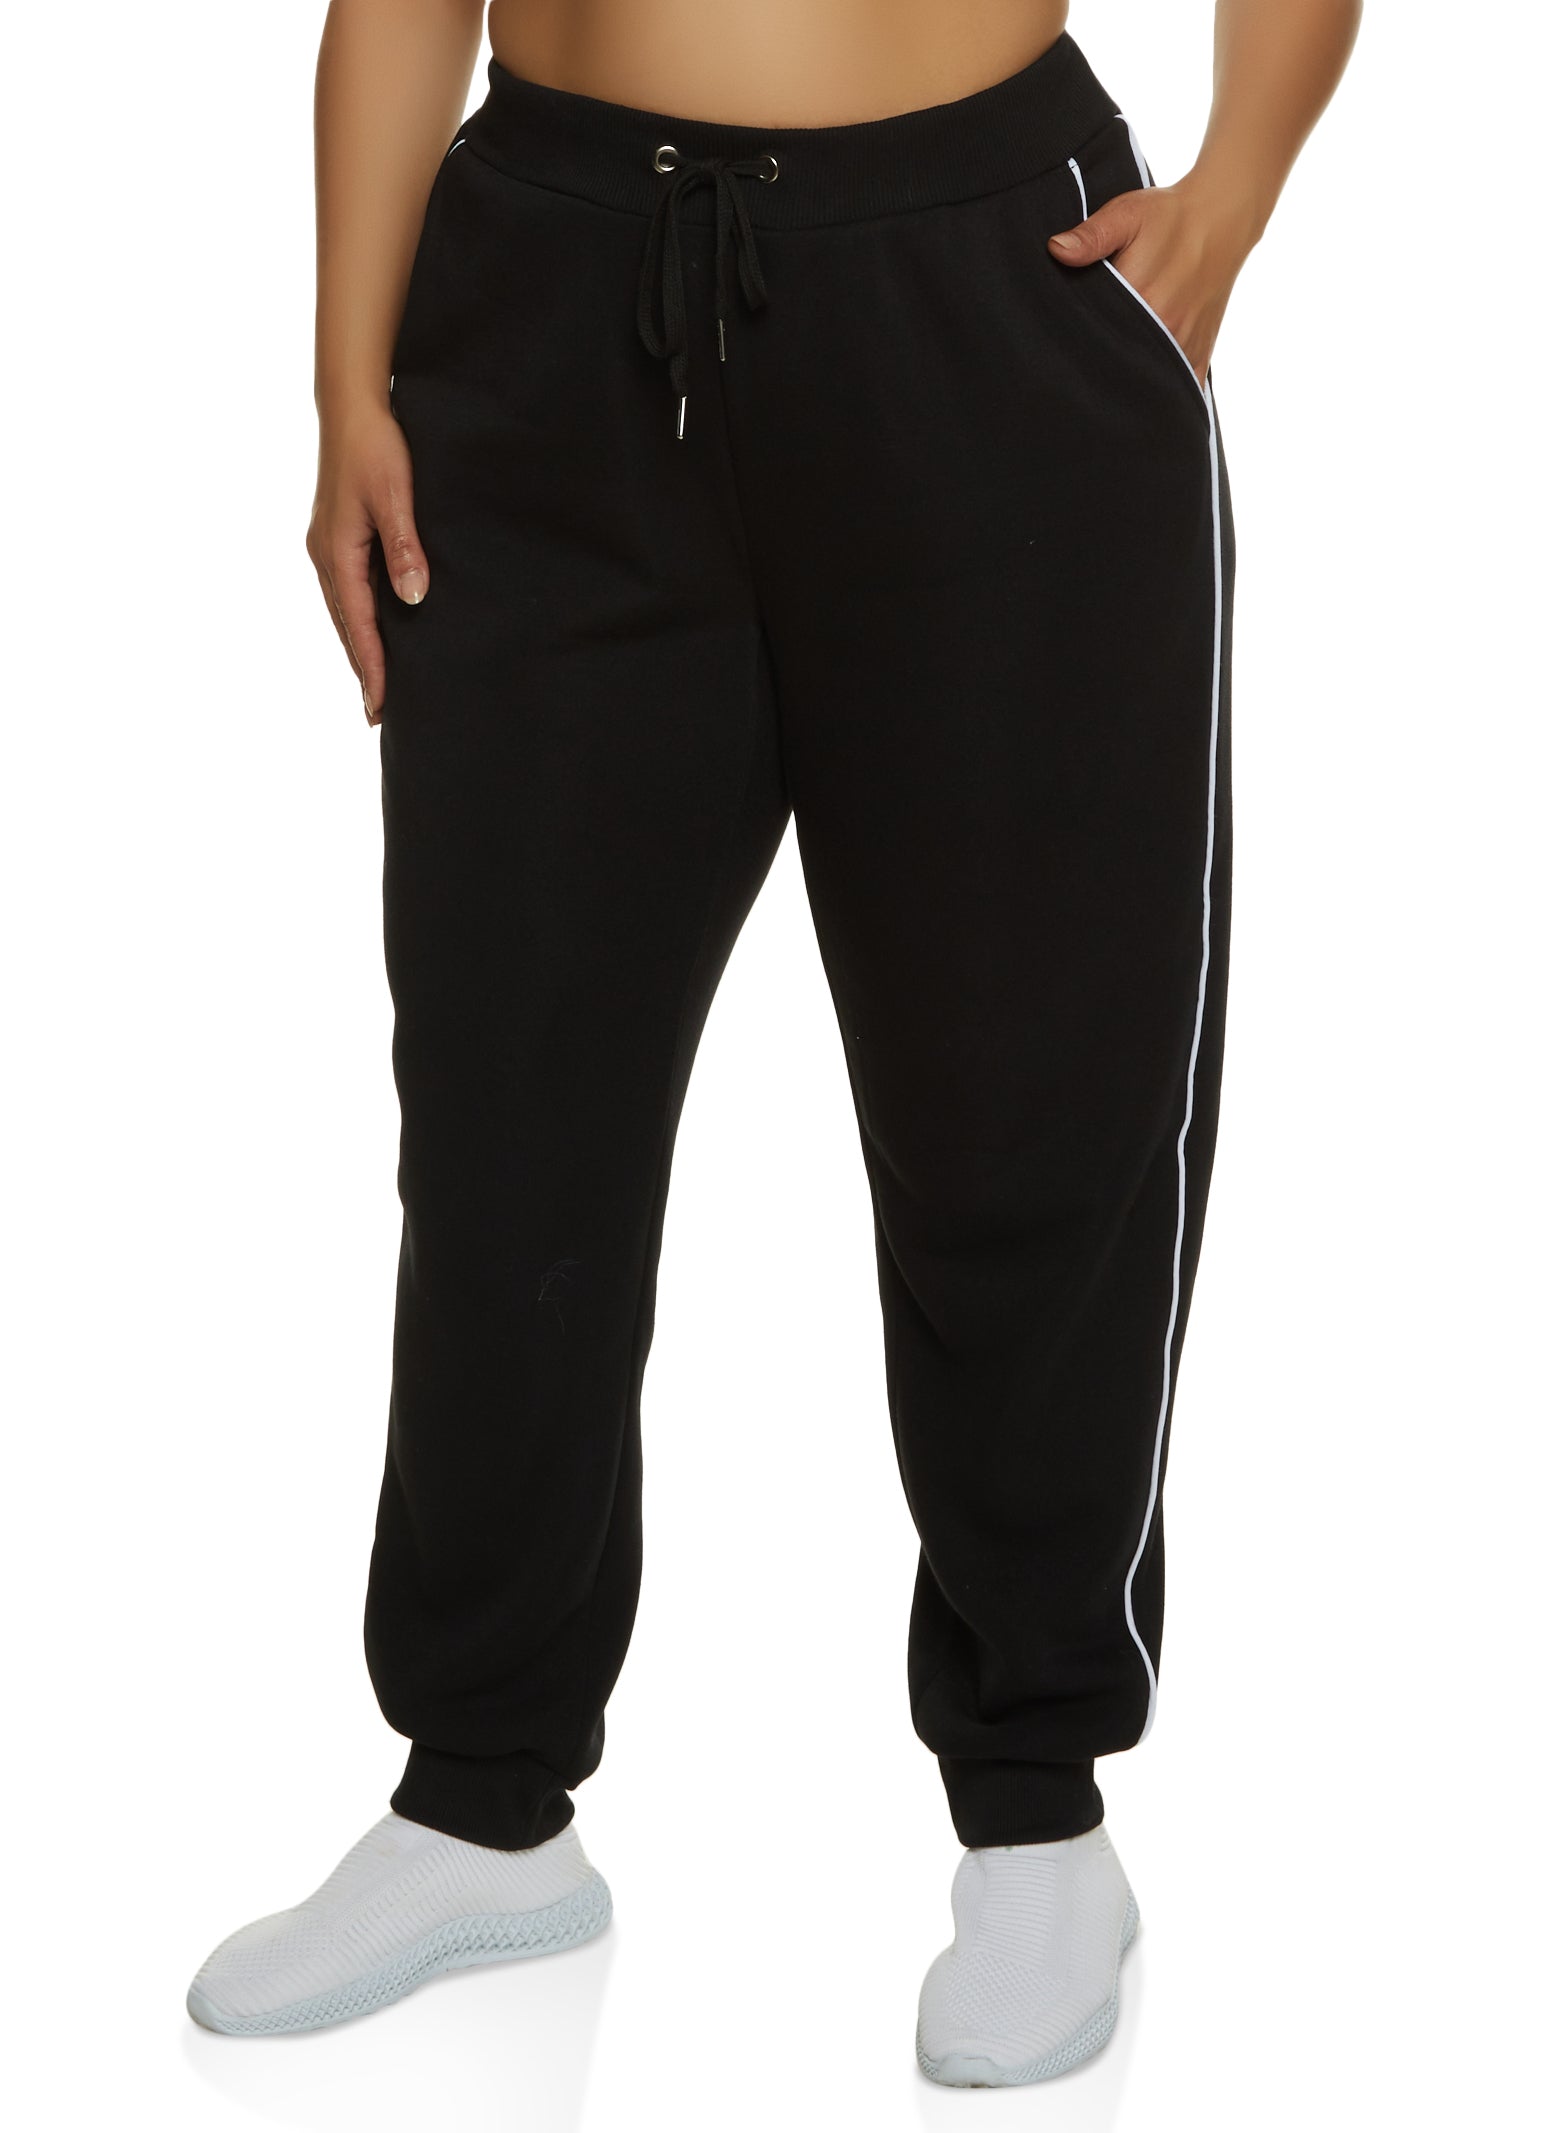 Rainbow Shops Womens Plus Size Side Contrast Piping Drawstring Joggers,  Black, Size 2X